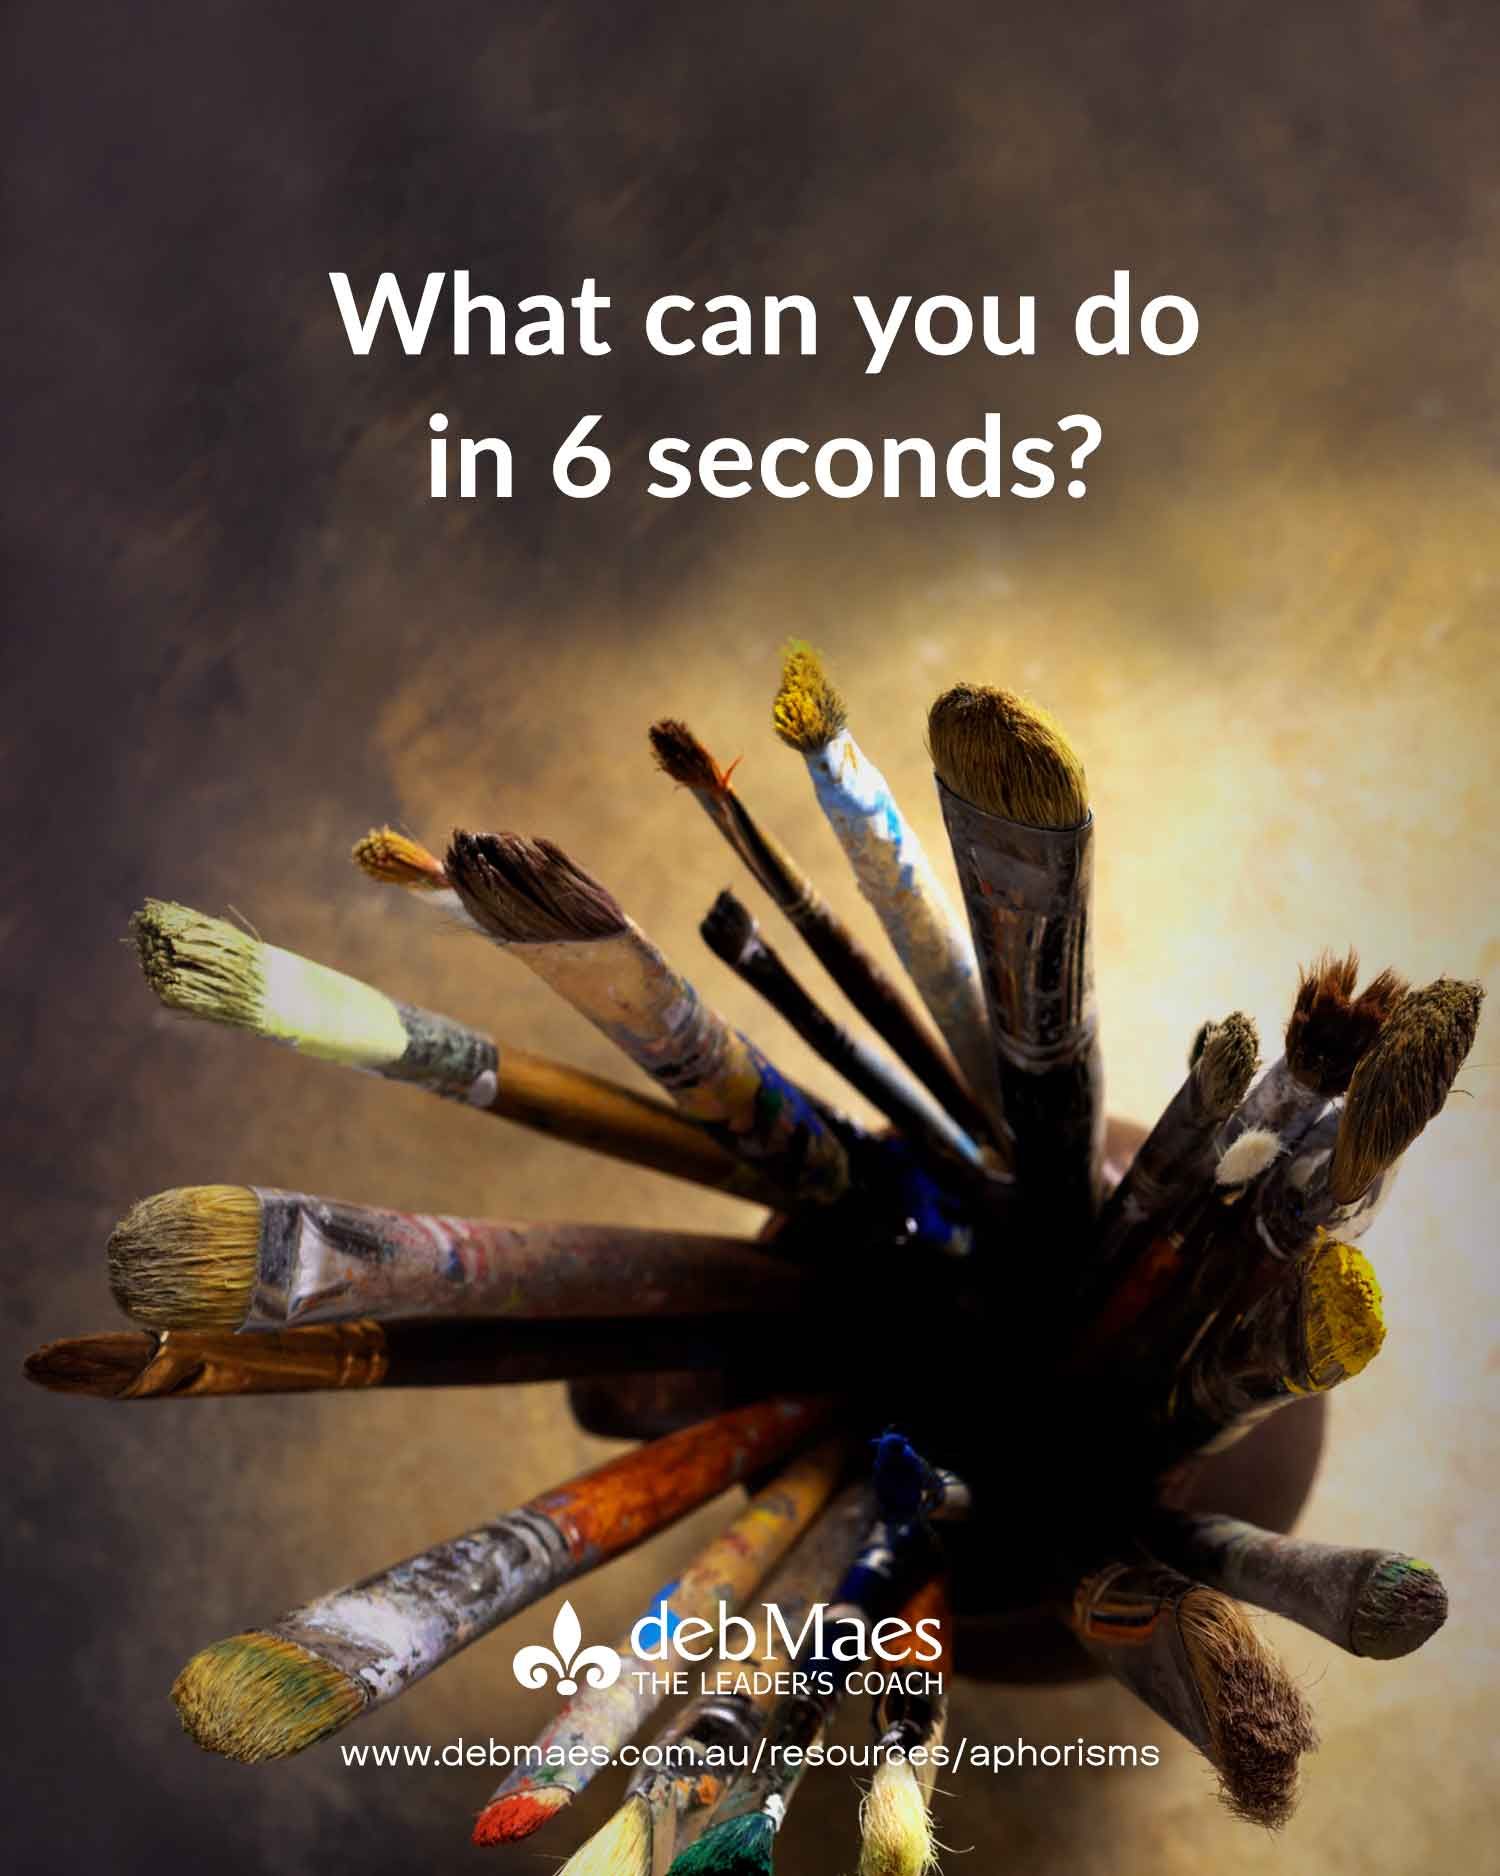 WHAT CAN YOU DO IN 6 SECONDS?